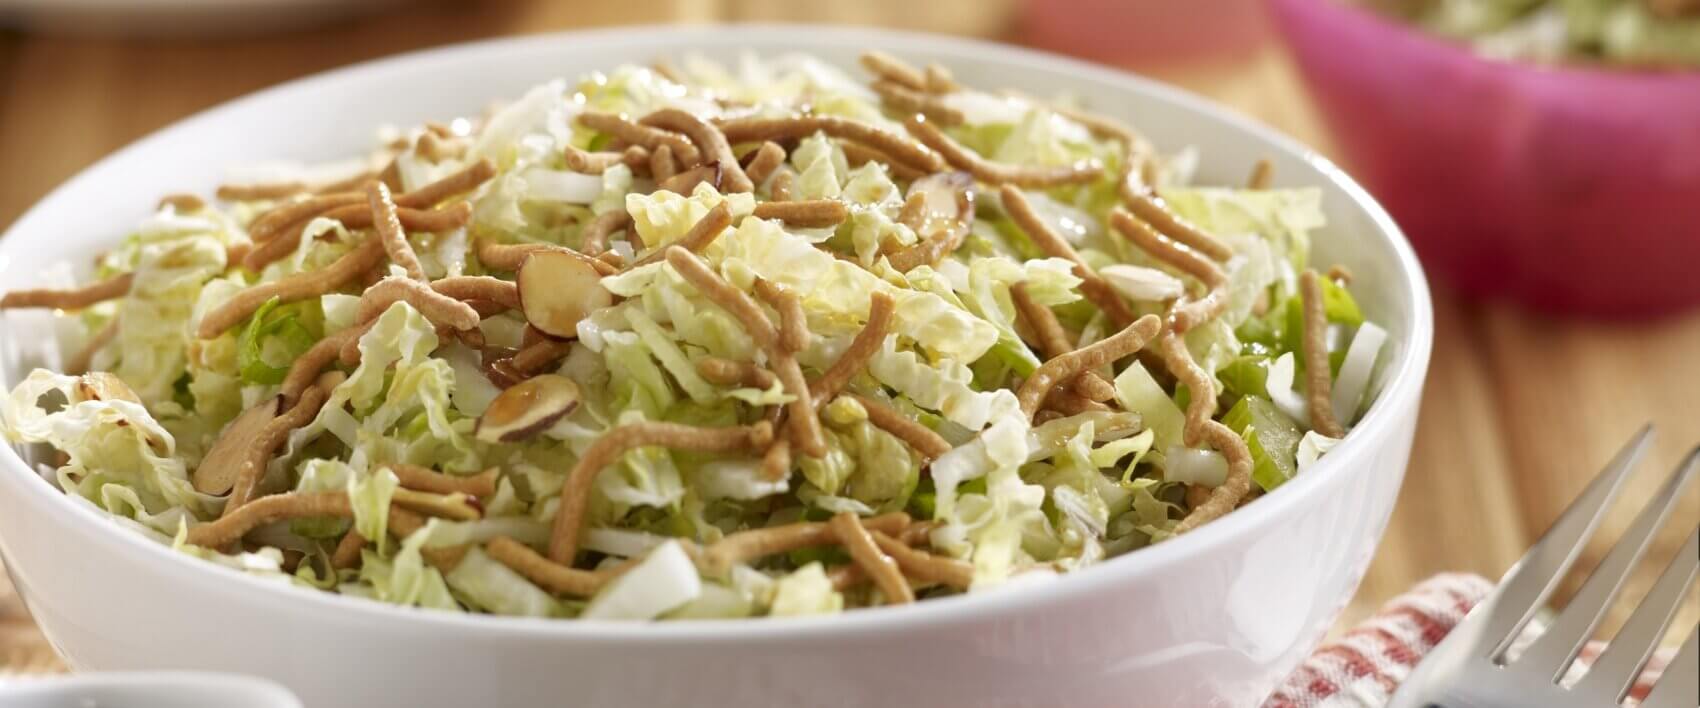 At the Immigrant's Table: shredded Napa cabbage salad